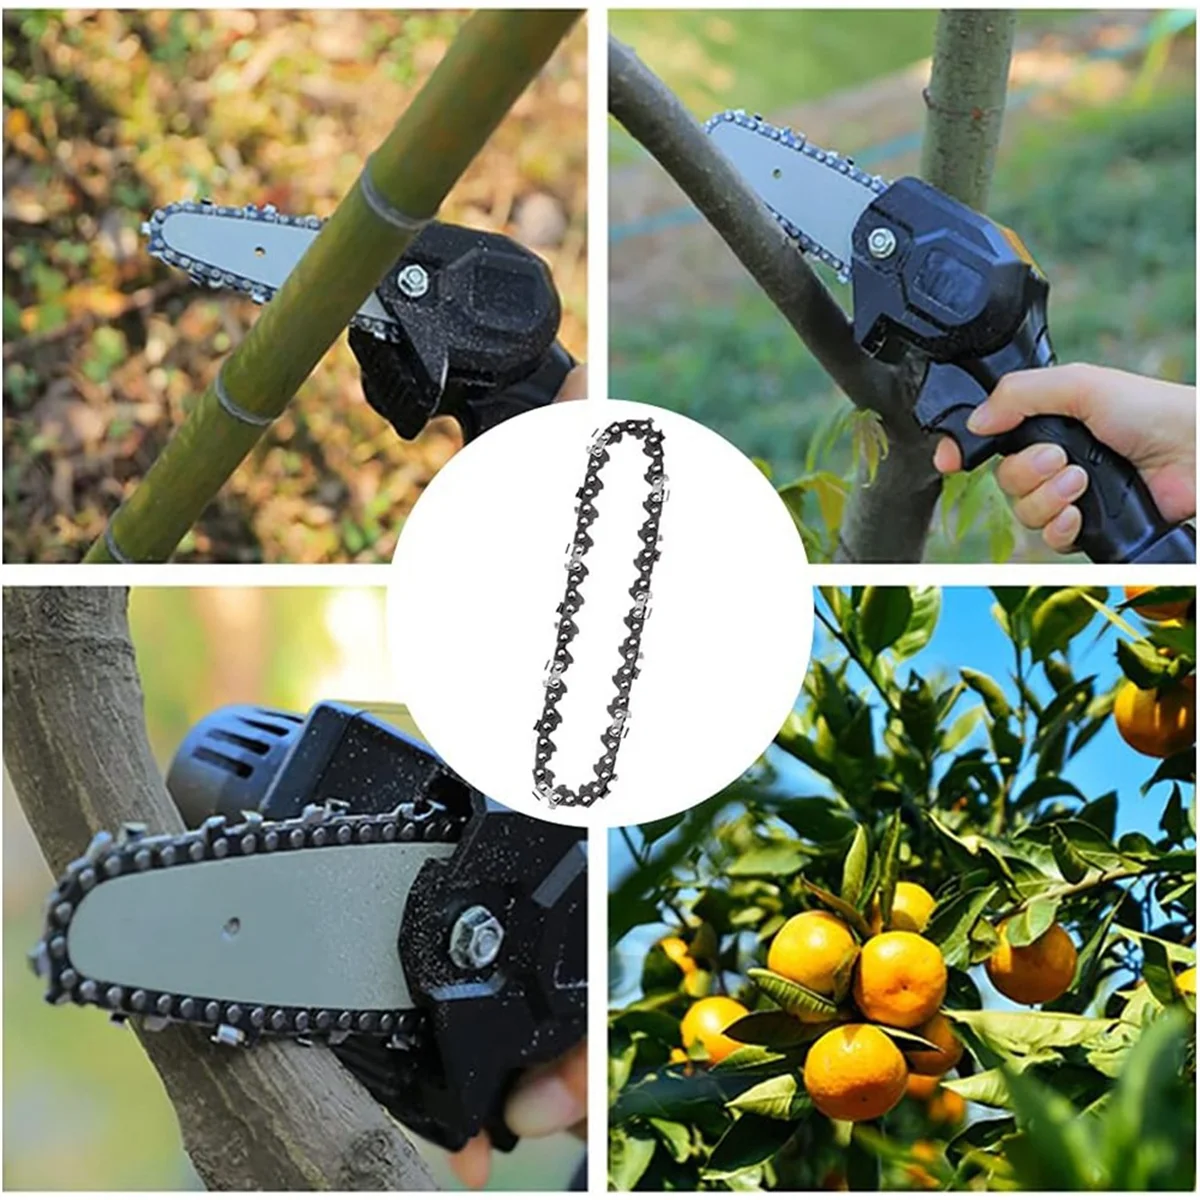 

4Pcs Mini Chainsaw Chain 4 Inch Guide Saw Chain 1/4 LP Pitch, 28 Sections for Electric Protable Handheld Chain Saw